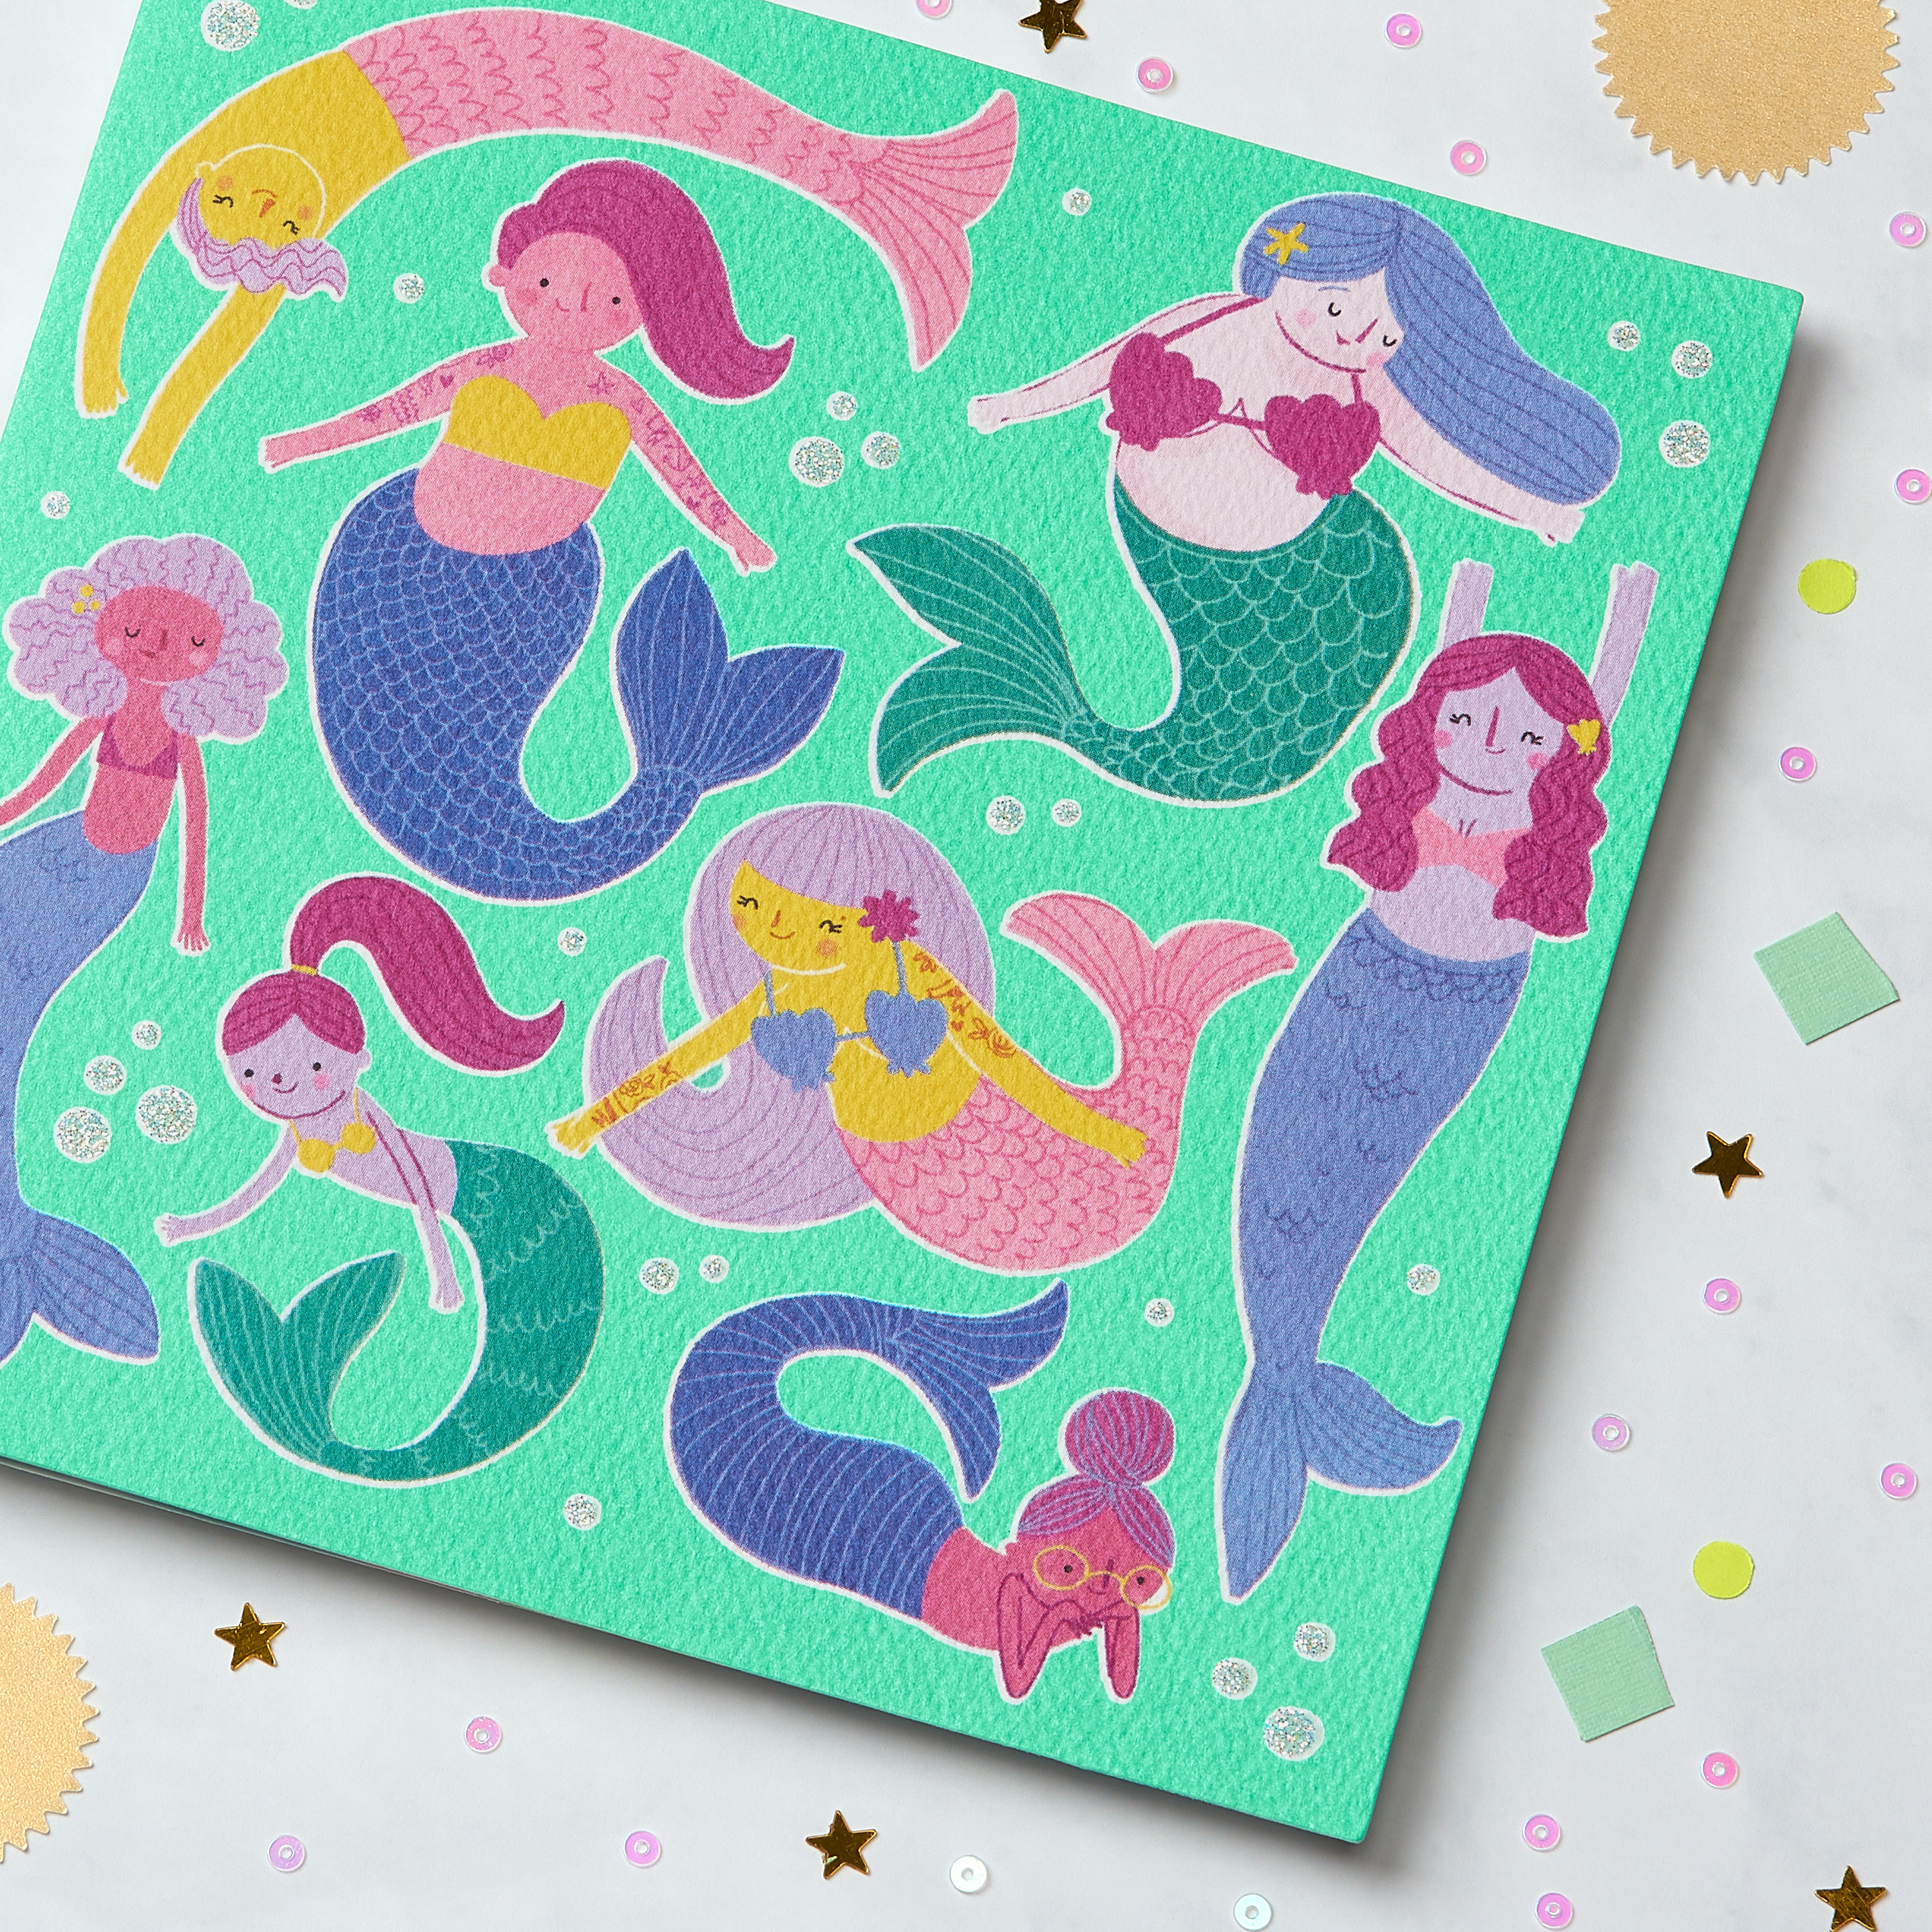 Mermaids Blank Greeting Card - Friendship, Thinking of You image